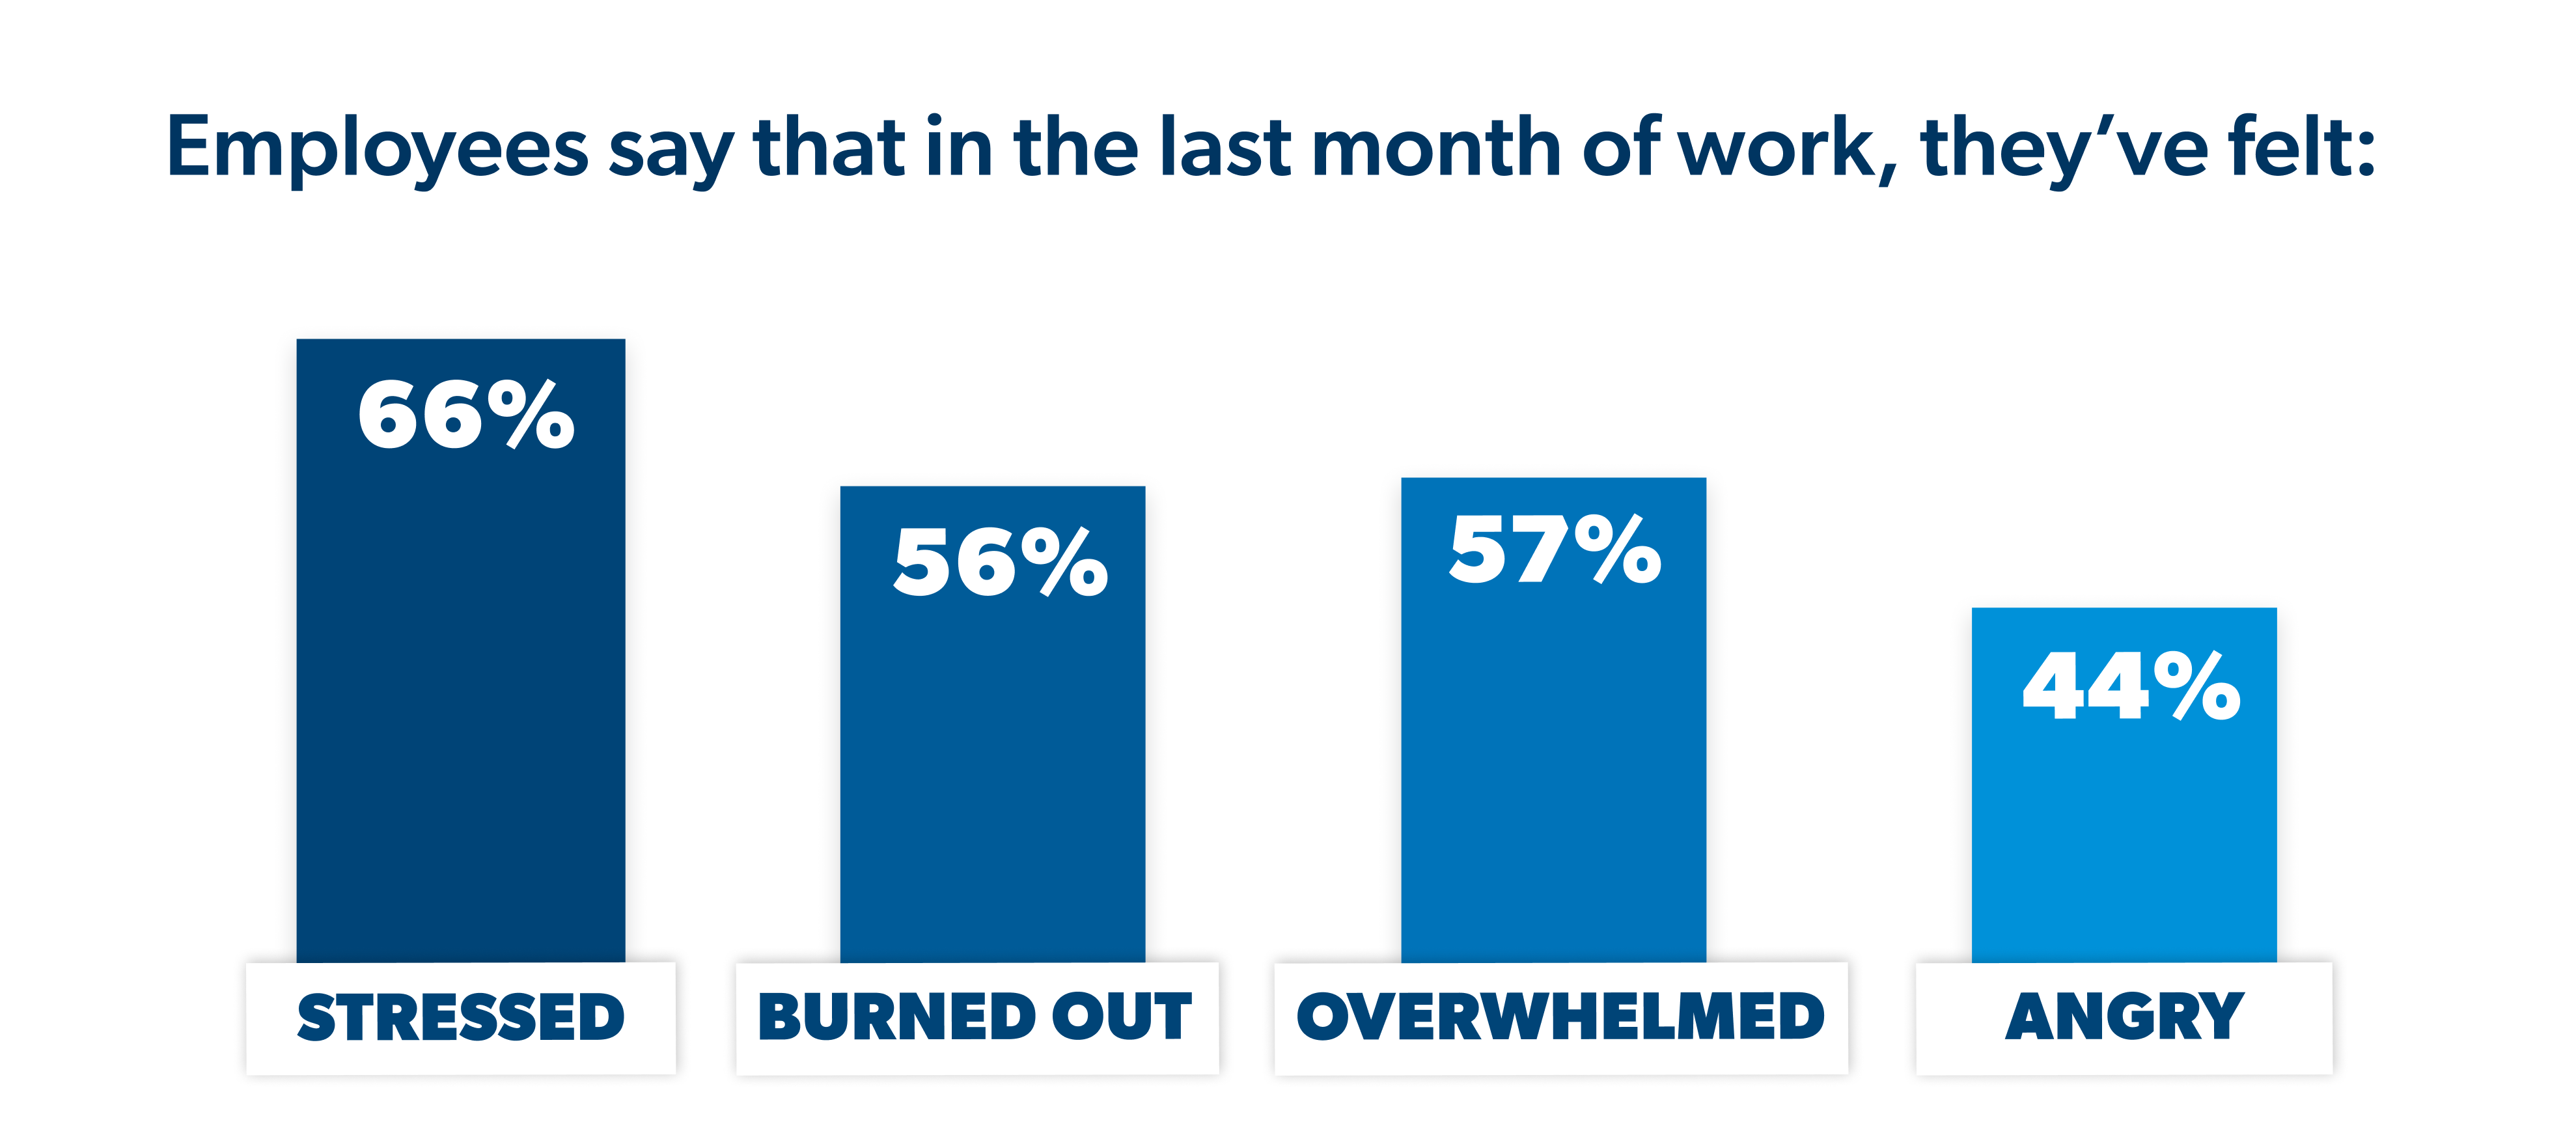 Employees Are Stressed, Burned Out, Overwhelmed and Angry